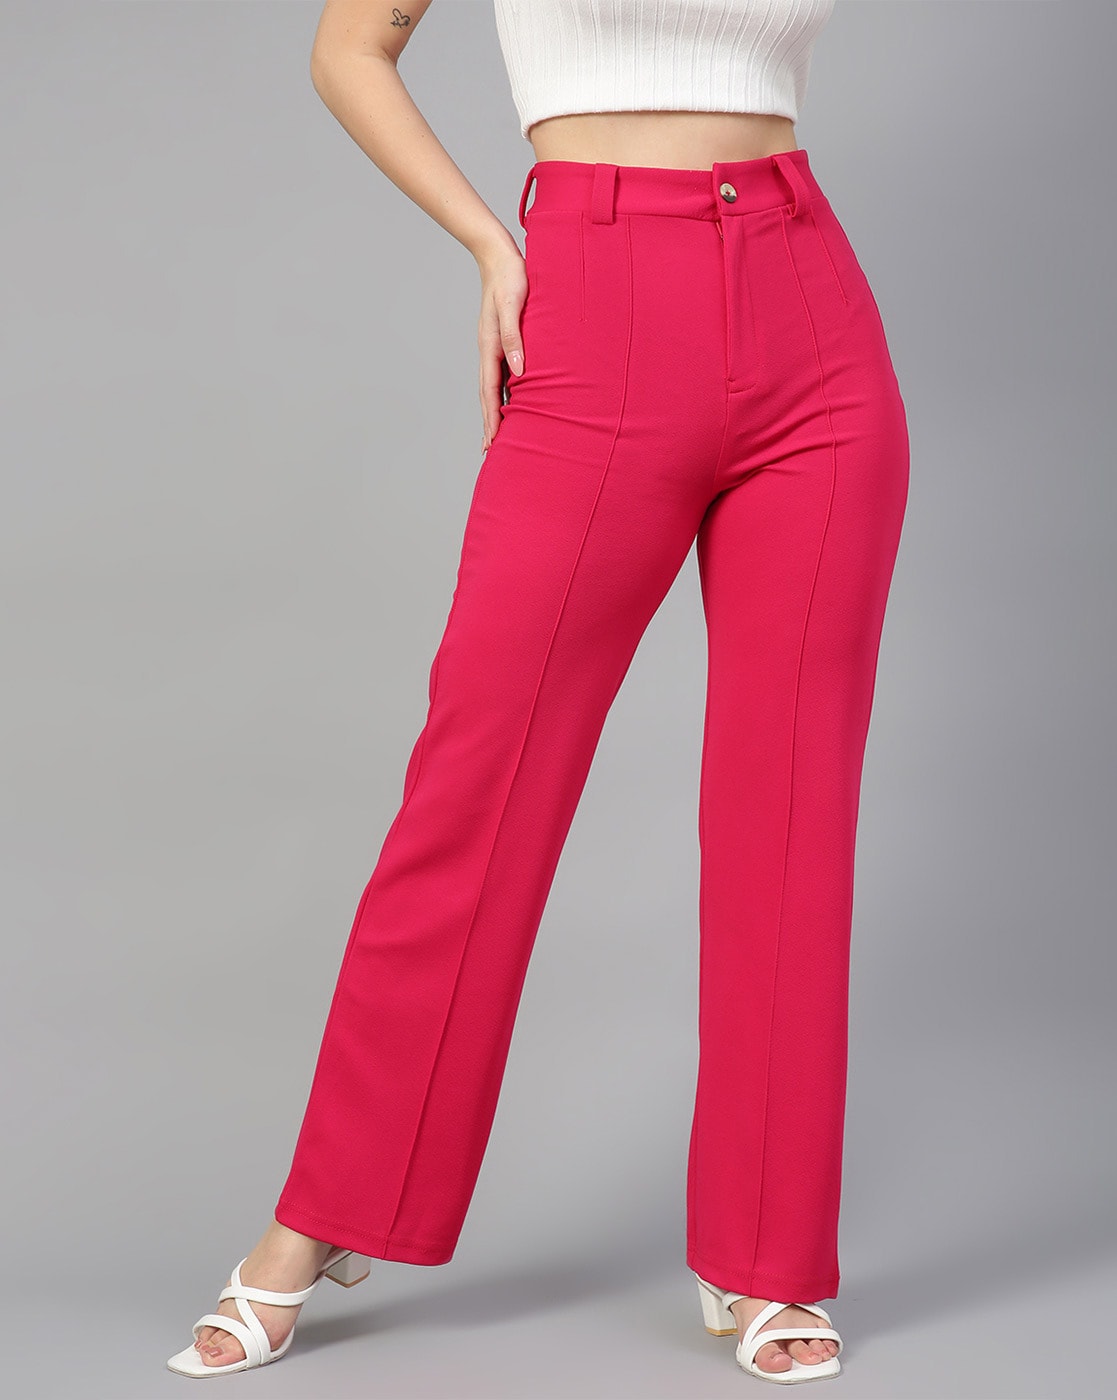 How To Wear Pink Pants 19 Outfit Ideas  Styling Tips